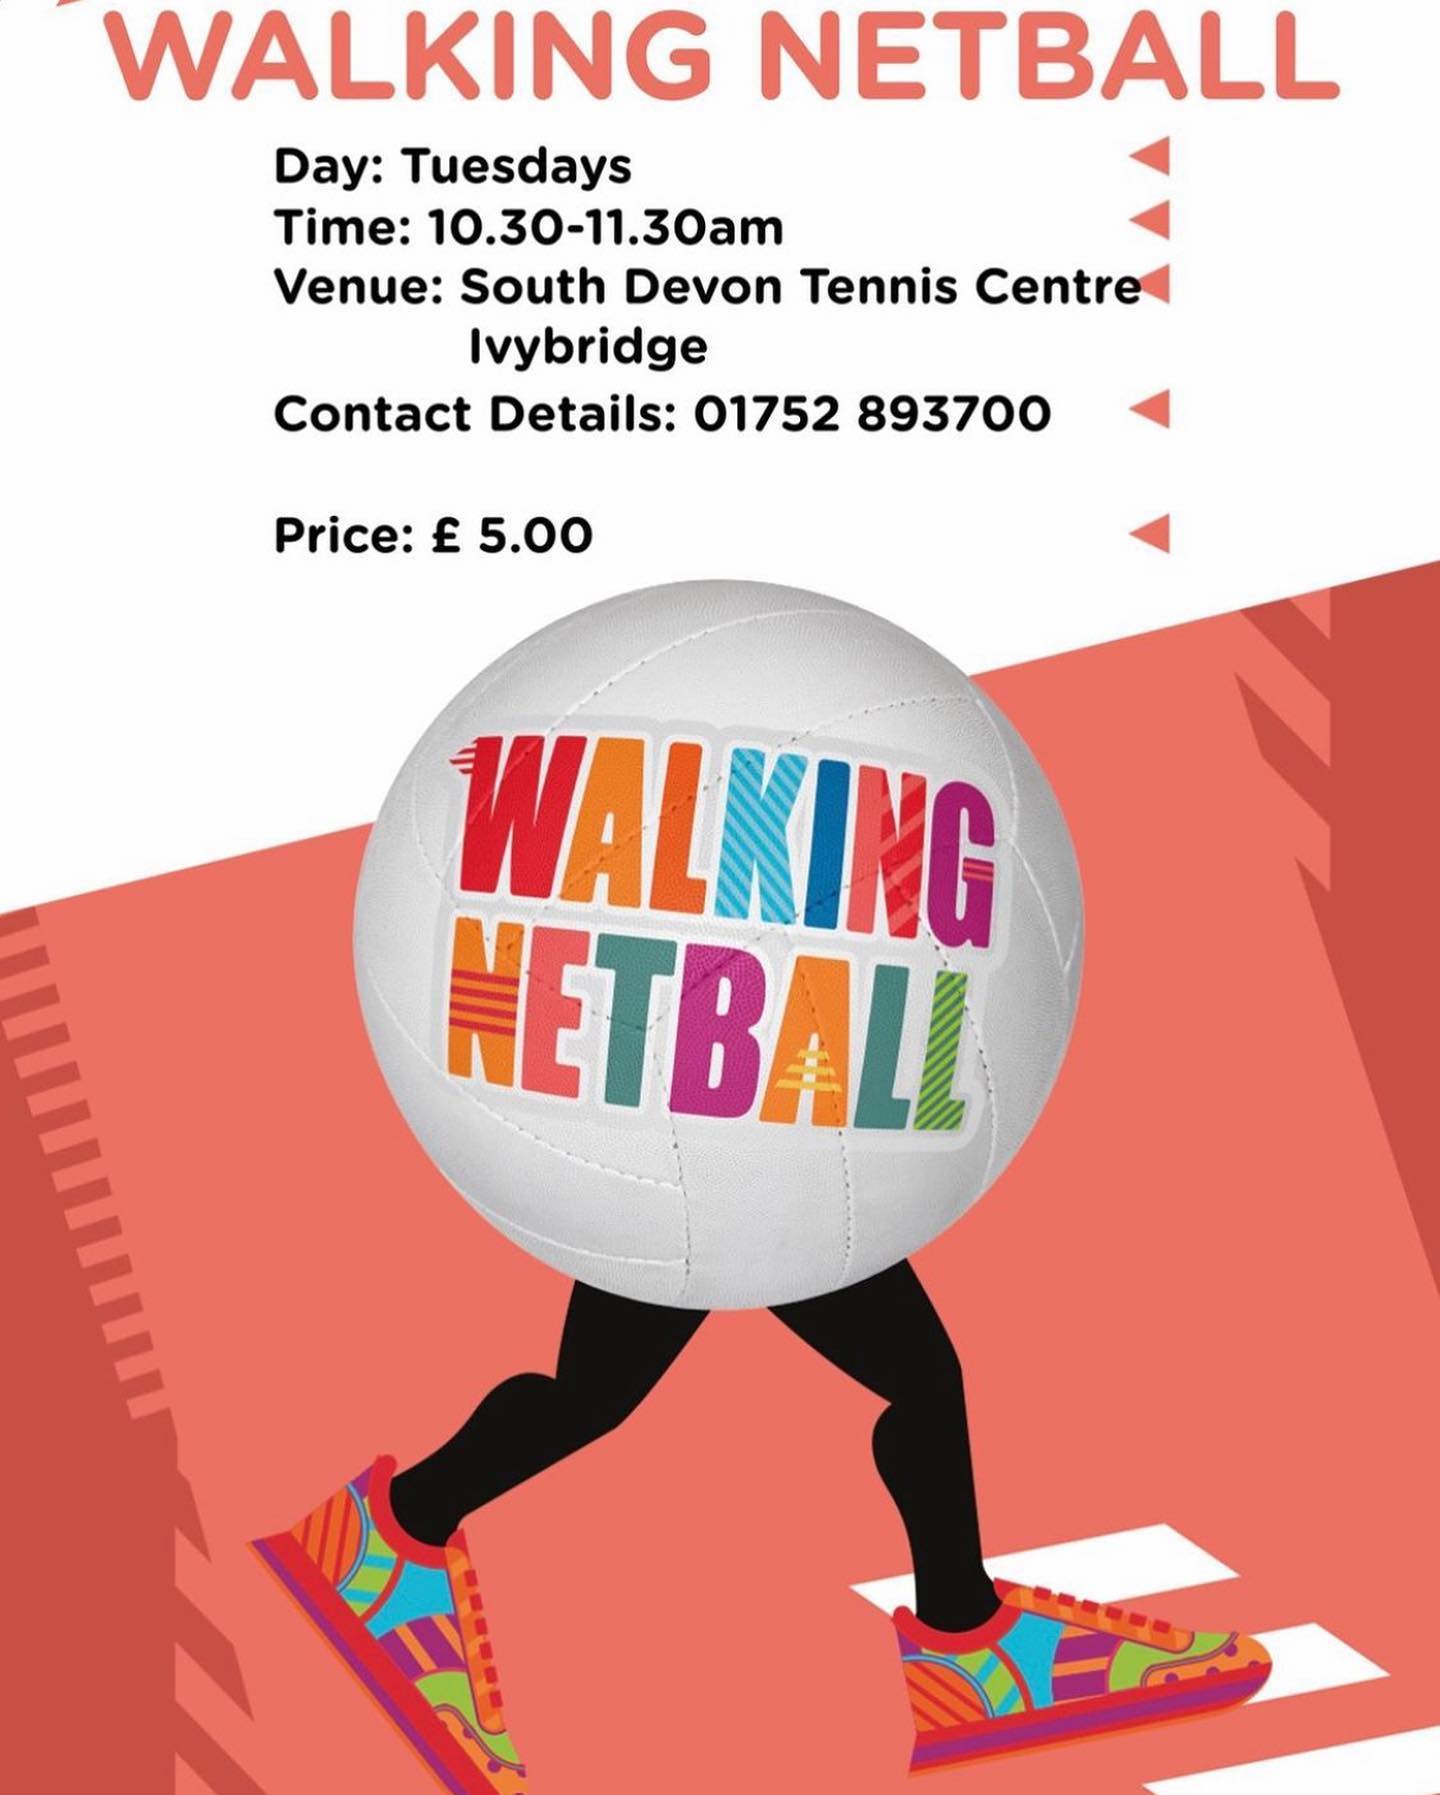 🏐 Walking Netball! 🏐 

Come along for an hour of walking netball with us 😄

🏐Anyone can play regardless of your fitness level or your age! 

🏐You don’t need to have any previous experience with playing netball. 

🏐 Fantastic exercise, a lot of laughs and a great way to meet new people! 

#netball #southdevon #walkingnetball #netballengland